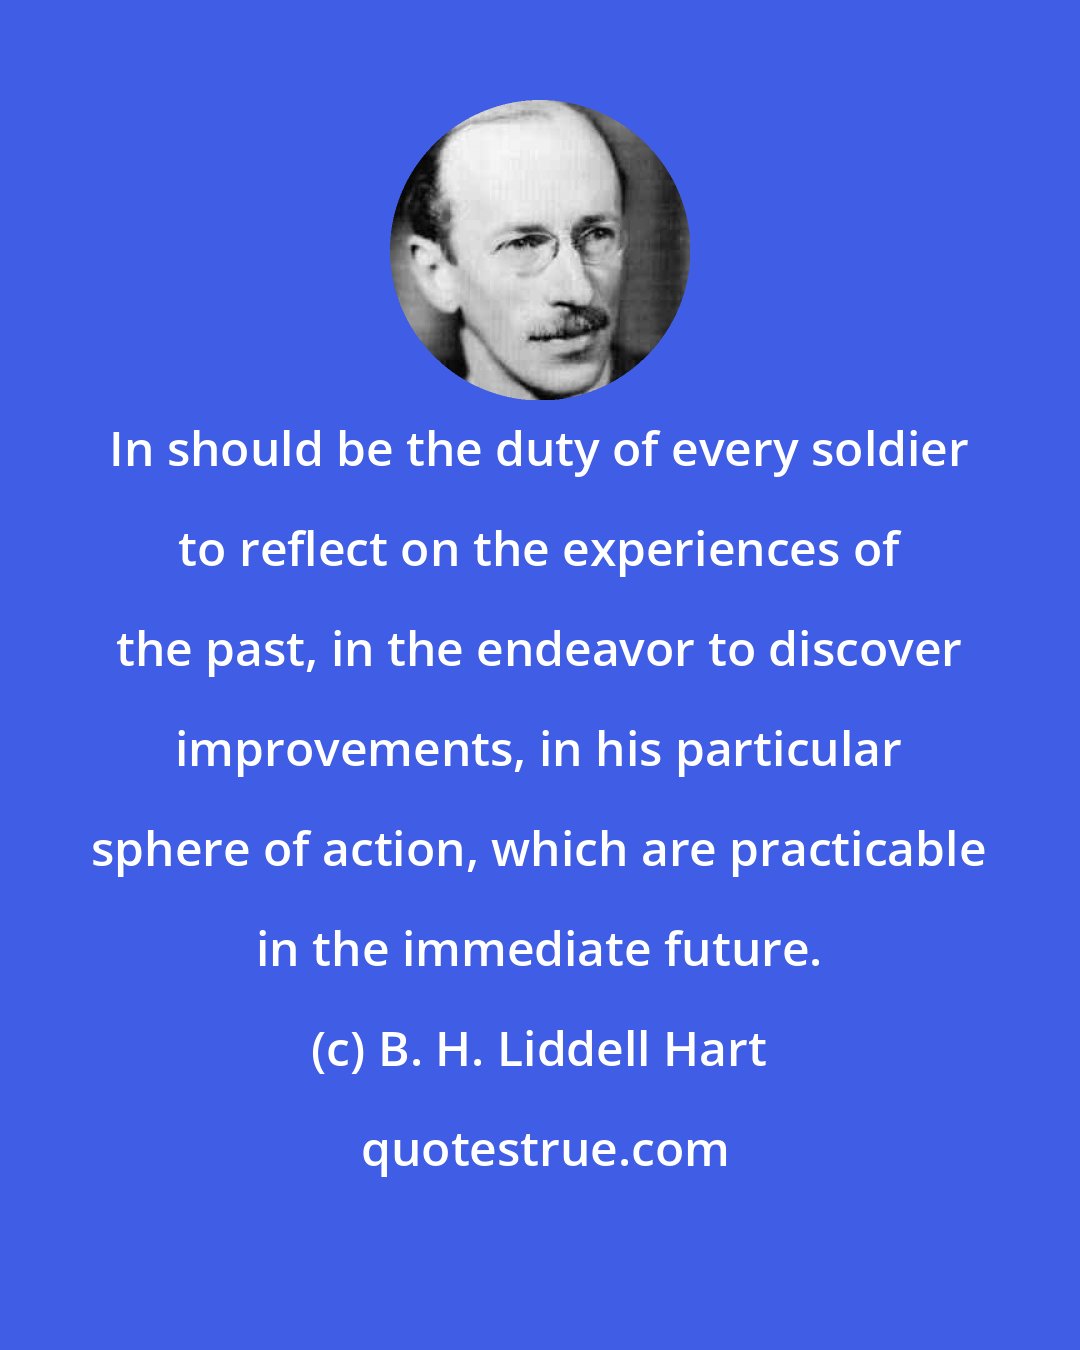 B. H. Liddell Hart: In should be the duty of every soldier to reflect on the experiences of the past, in the endeavor to discover improvements, in his particular sphere of action, which are practicable in the immediate future.